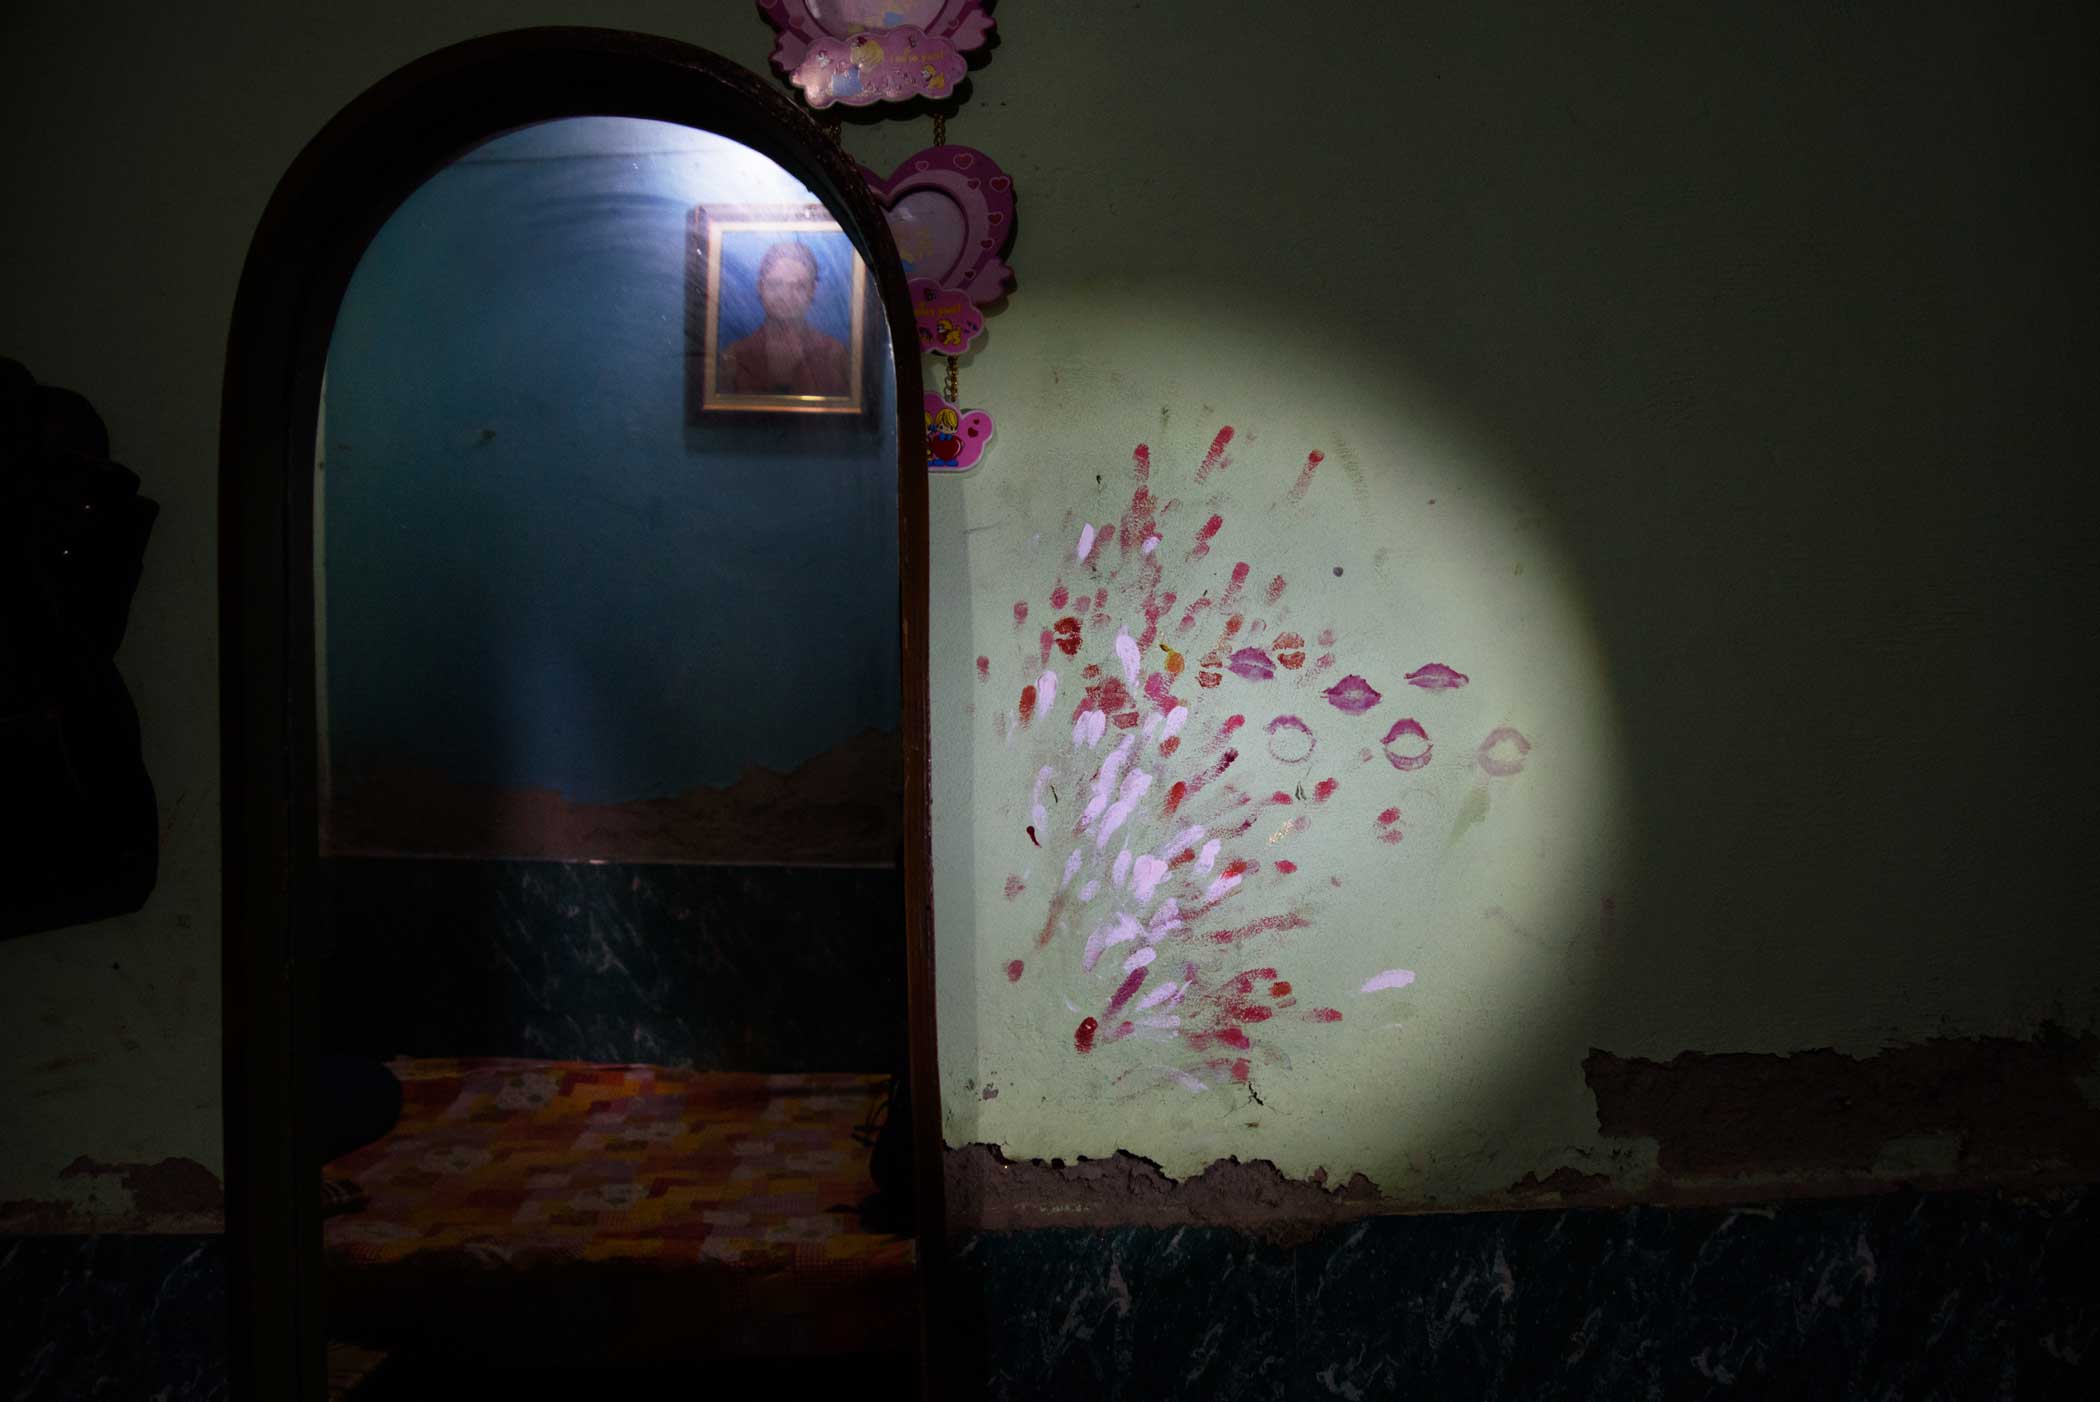 A view of Priya's room who was gangraped and choked to death at the Delhi-Haryana border. Priya, 24 was on her way back home from office, when she was gagged by two men from her neighborhood and taken to an un-constructed piece of land. School children found her body two days later in a semi-naked condition with ants coming out of her eyes and mouth. (Smita Sharma)